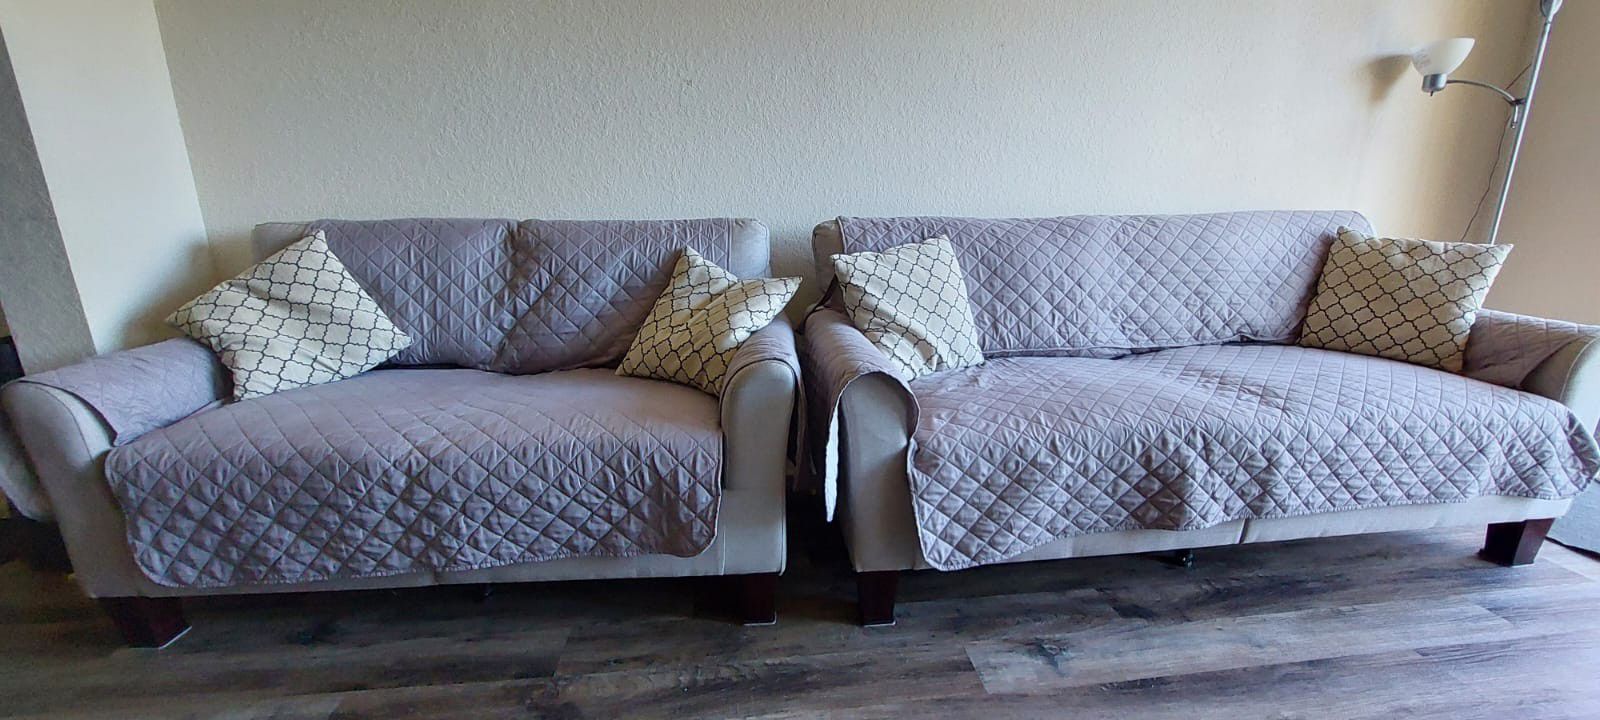 3 seat Sofa + Loveseat With Covers And Pillows